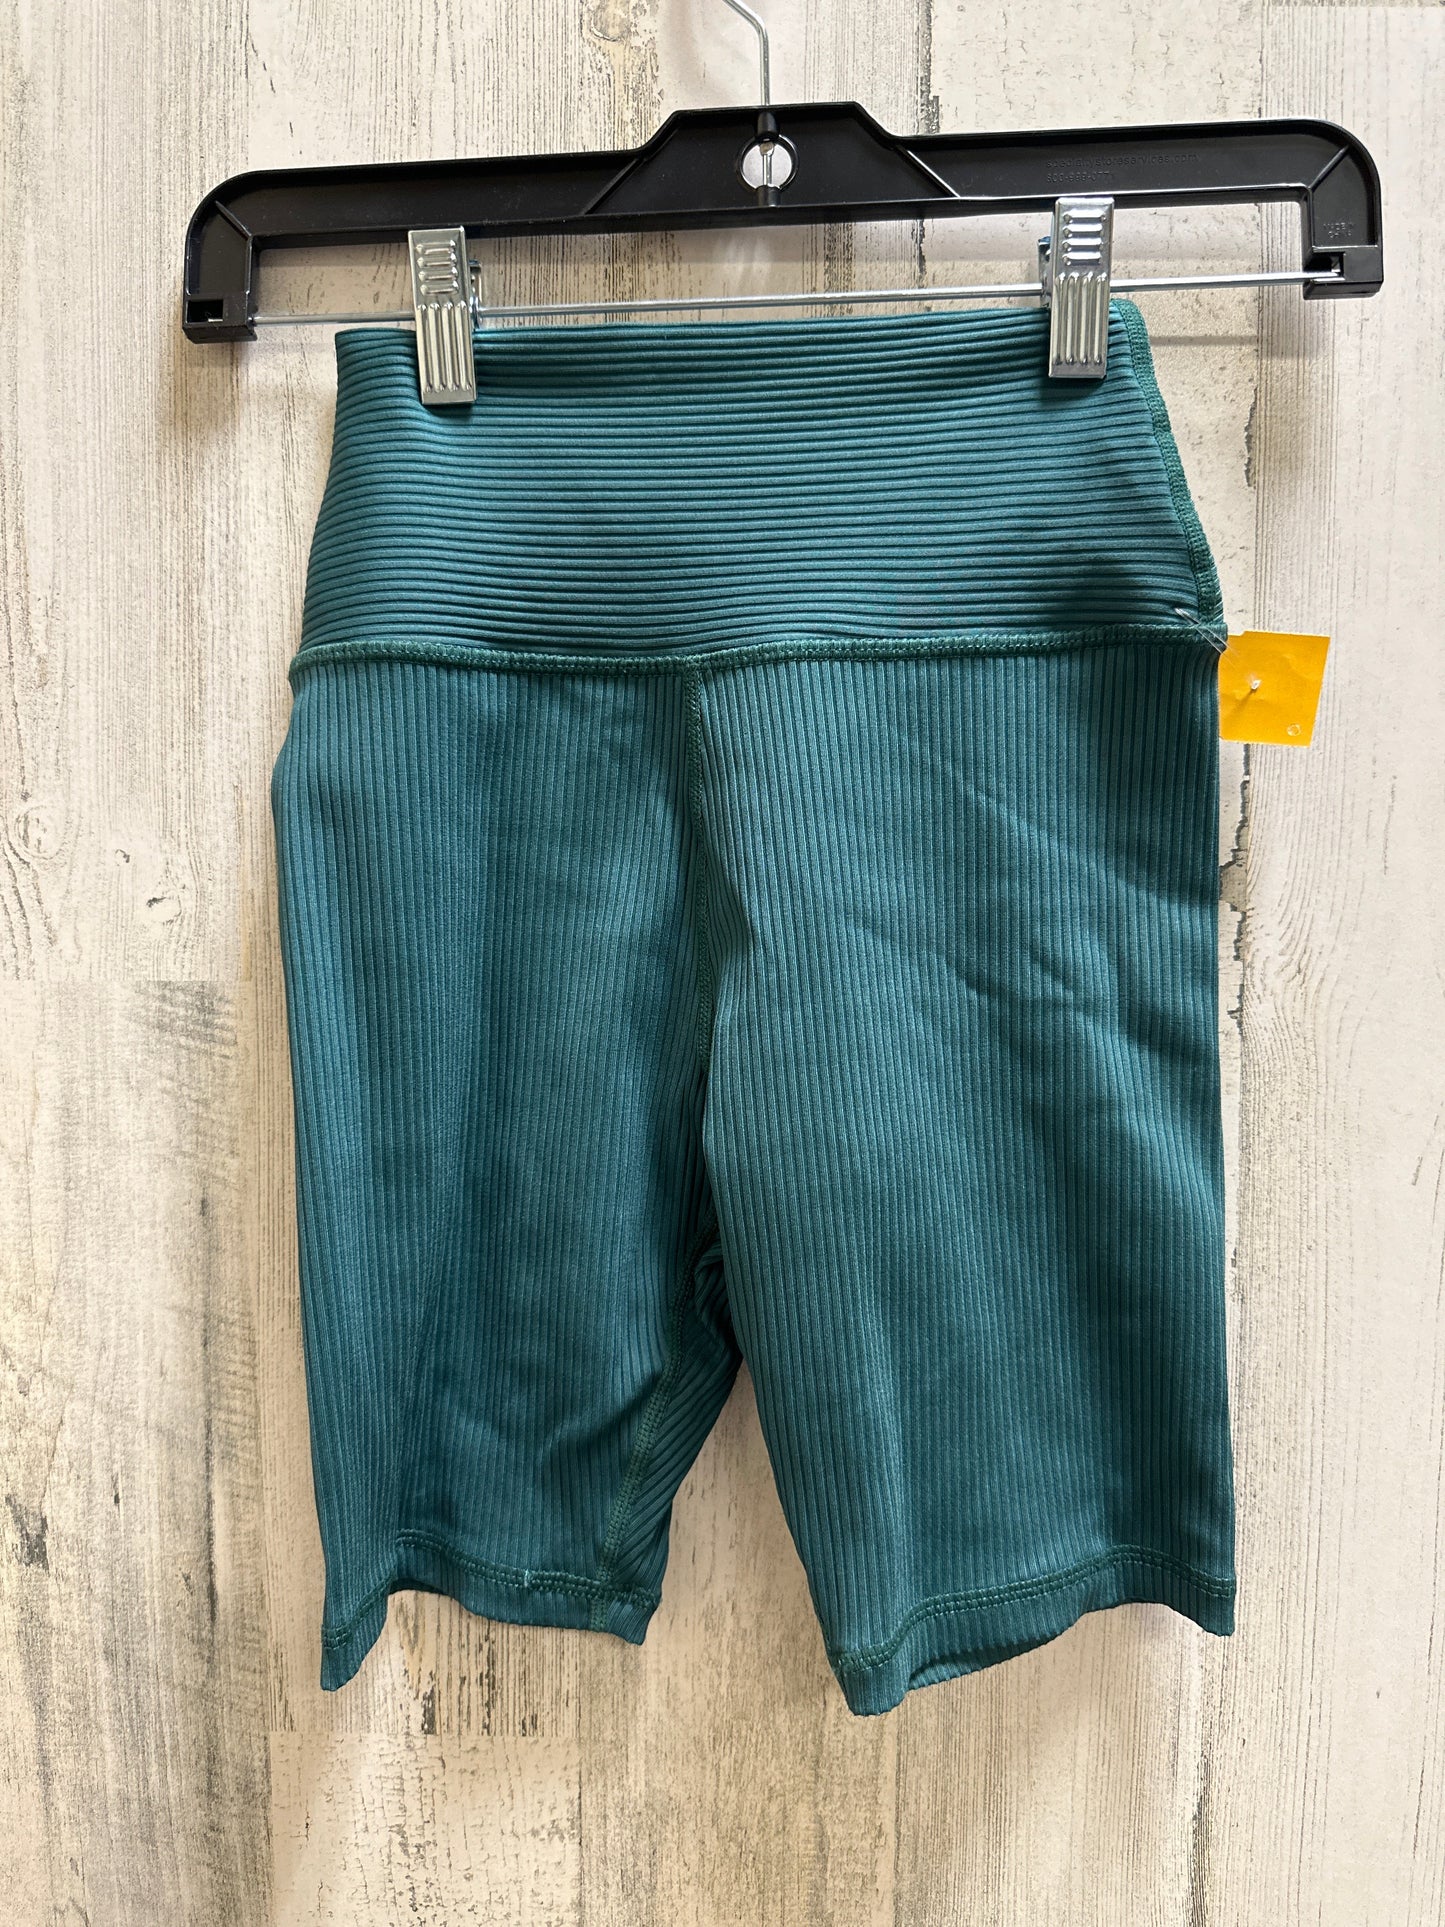 Green Athletic Capris Clothes Mentor, Size Xs